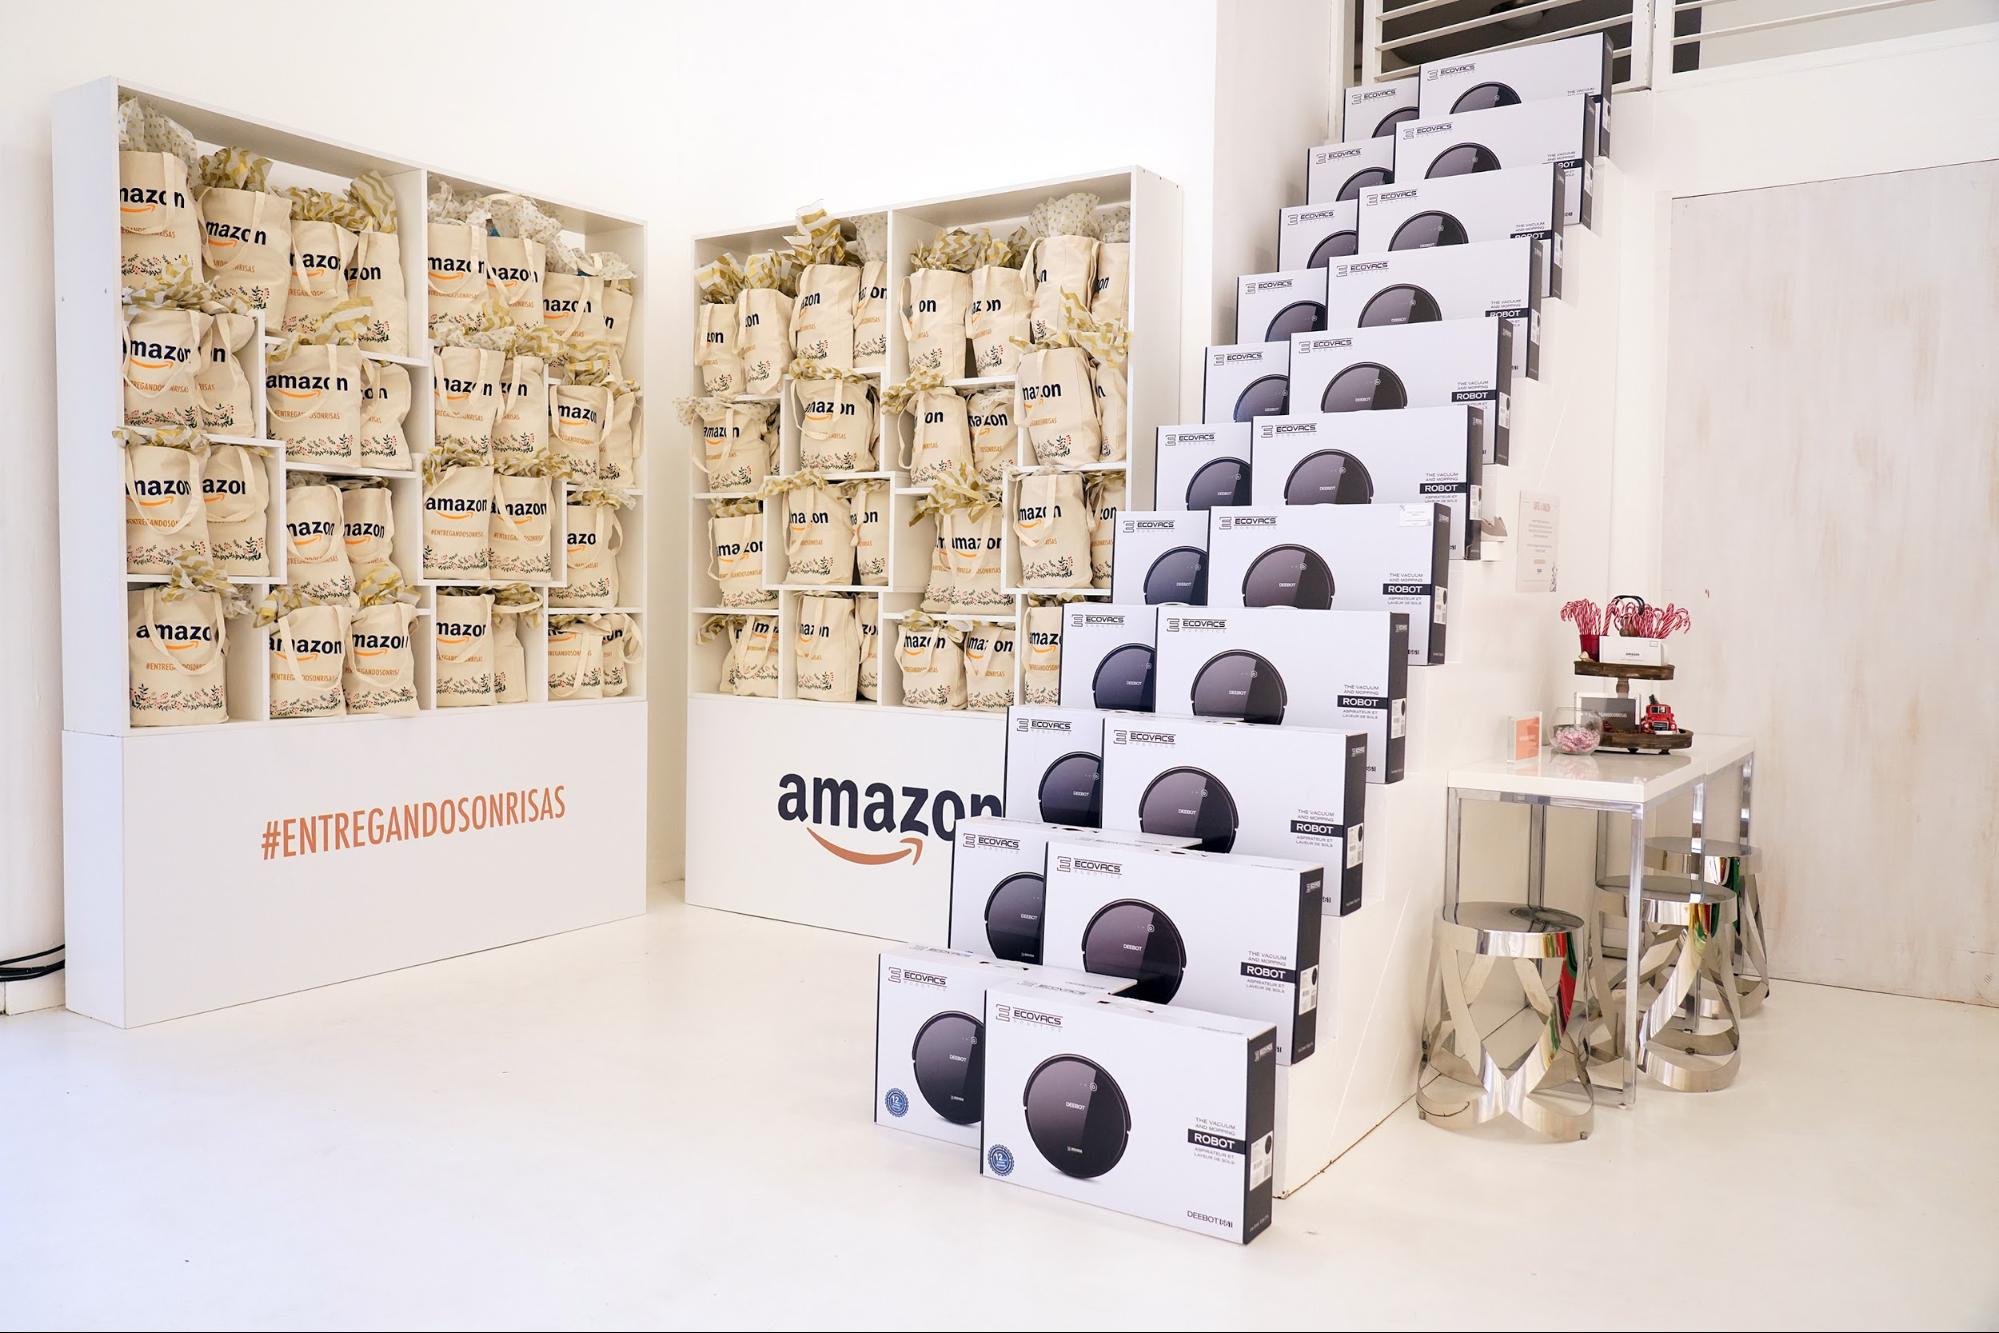 Product boxes for robot vacuums are stacked up white stairs neatly. beside that is a shelf with amazon gift bags and the hashtag #entregandosonrisas